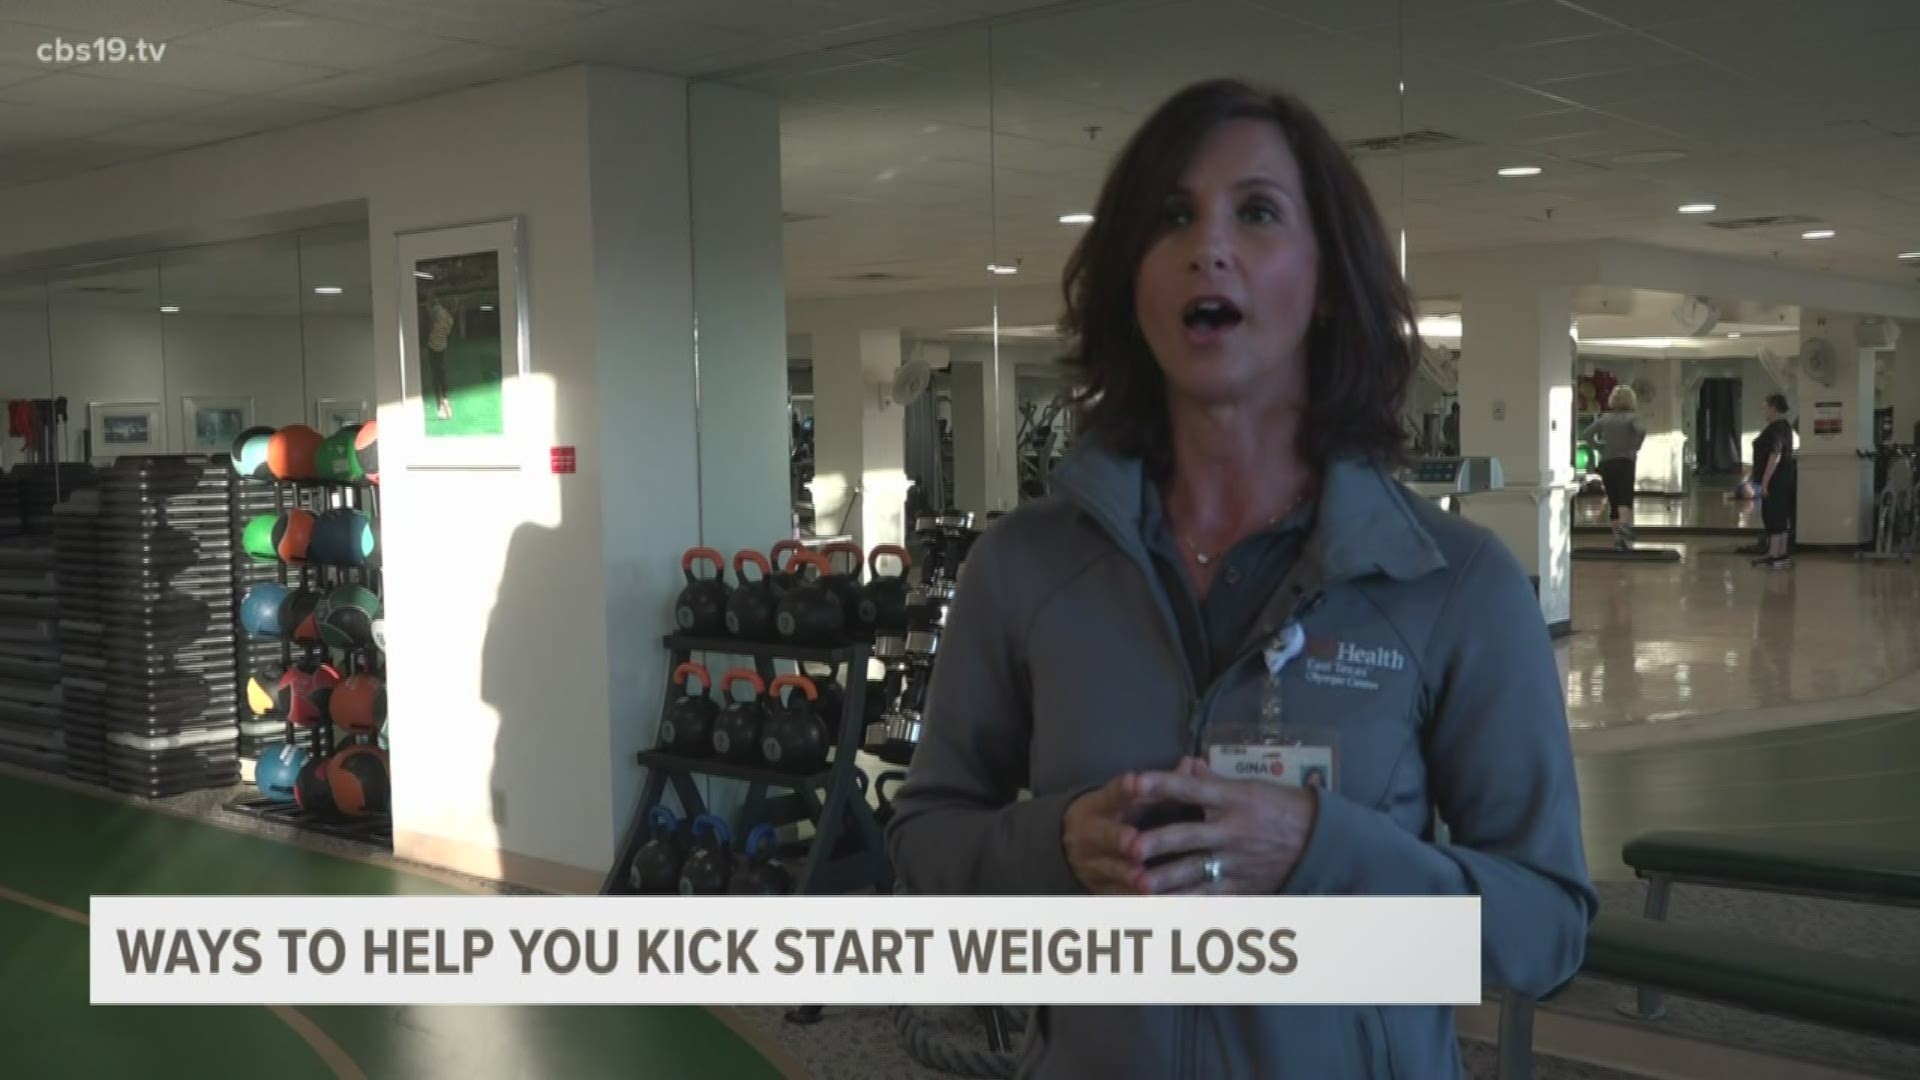 Kick starting your weight loss